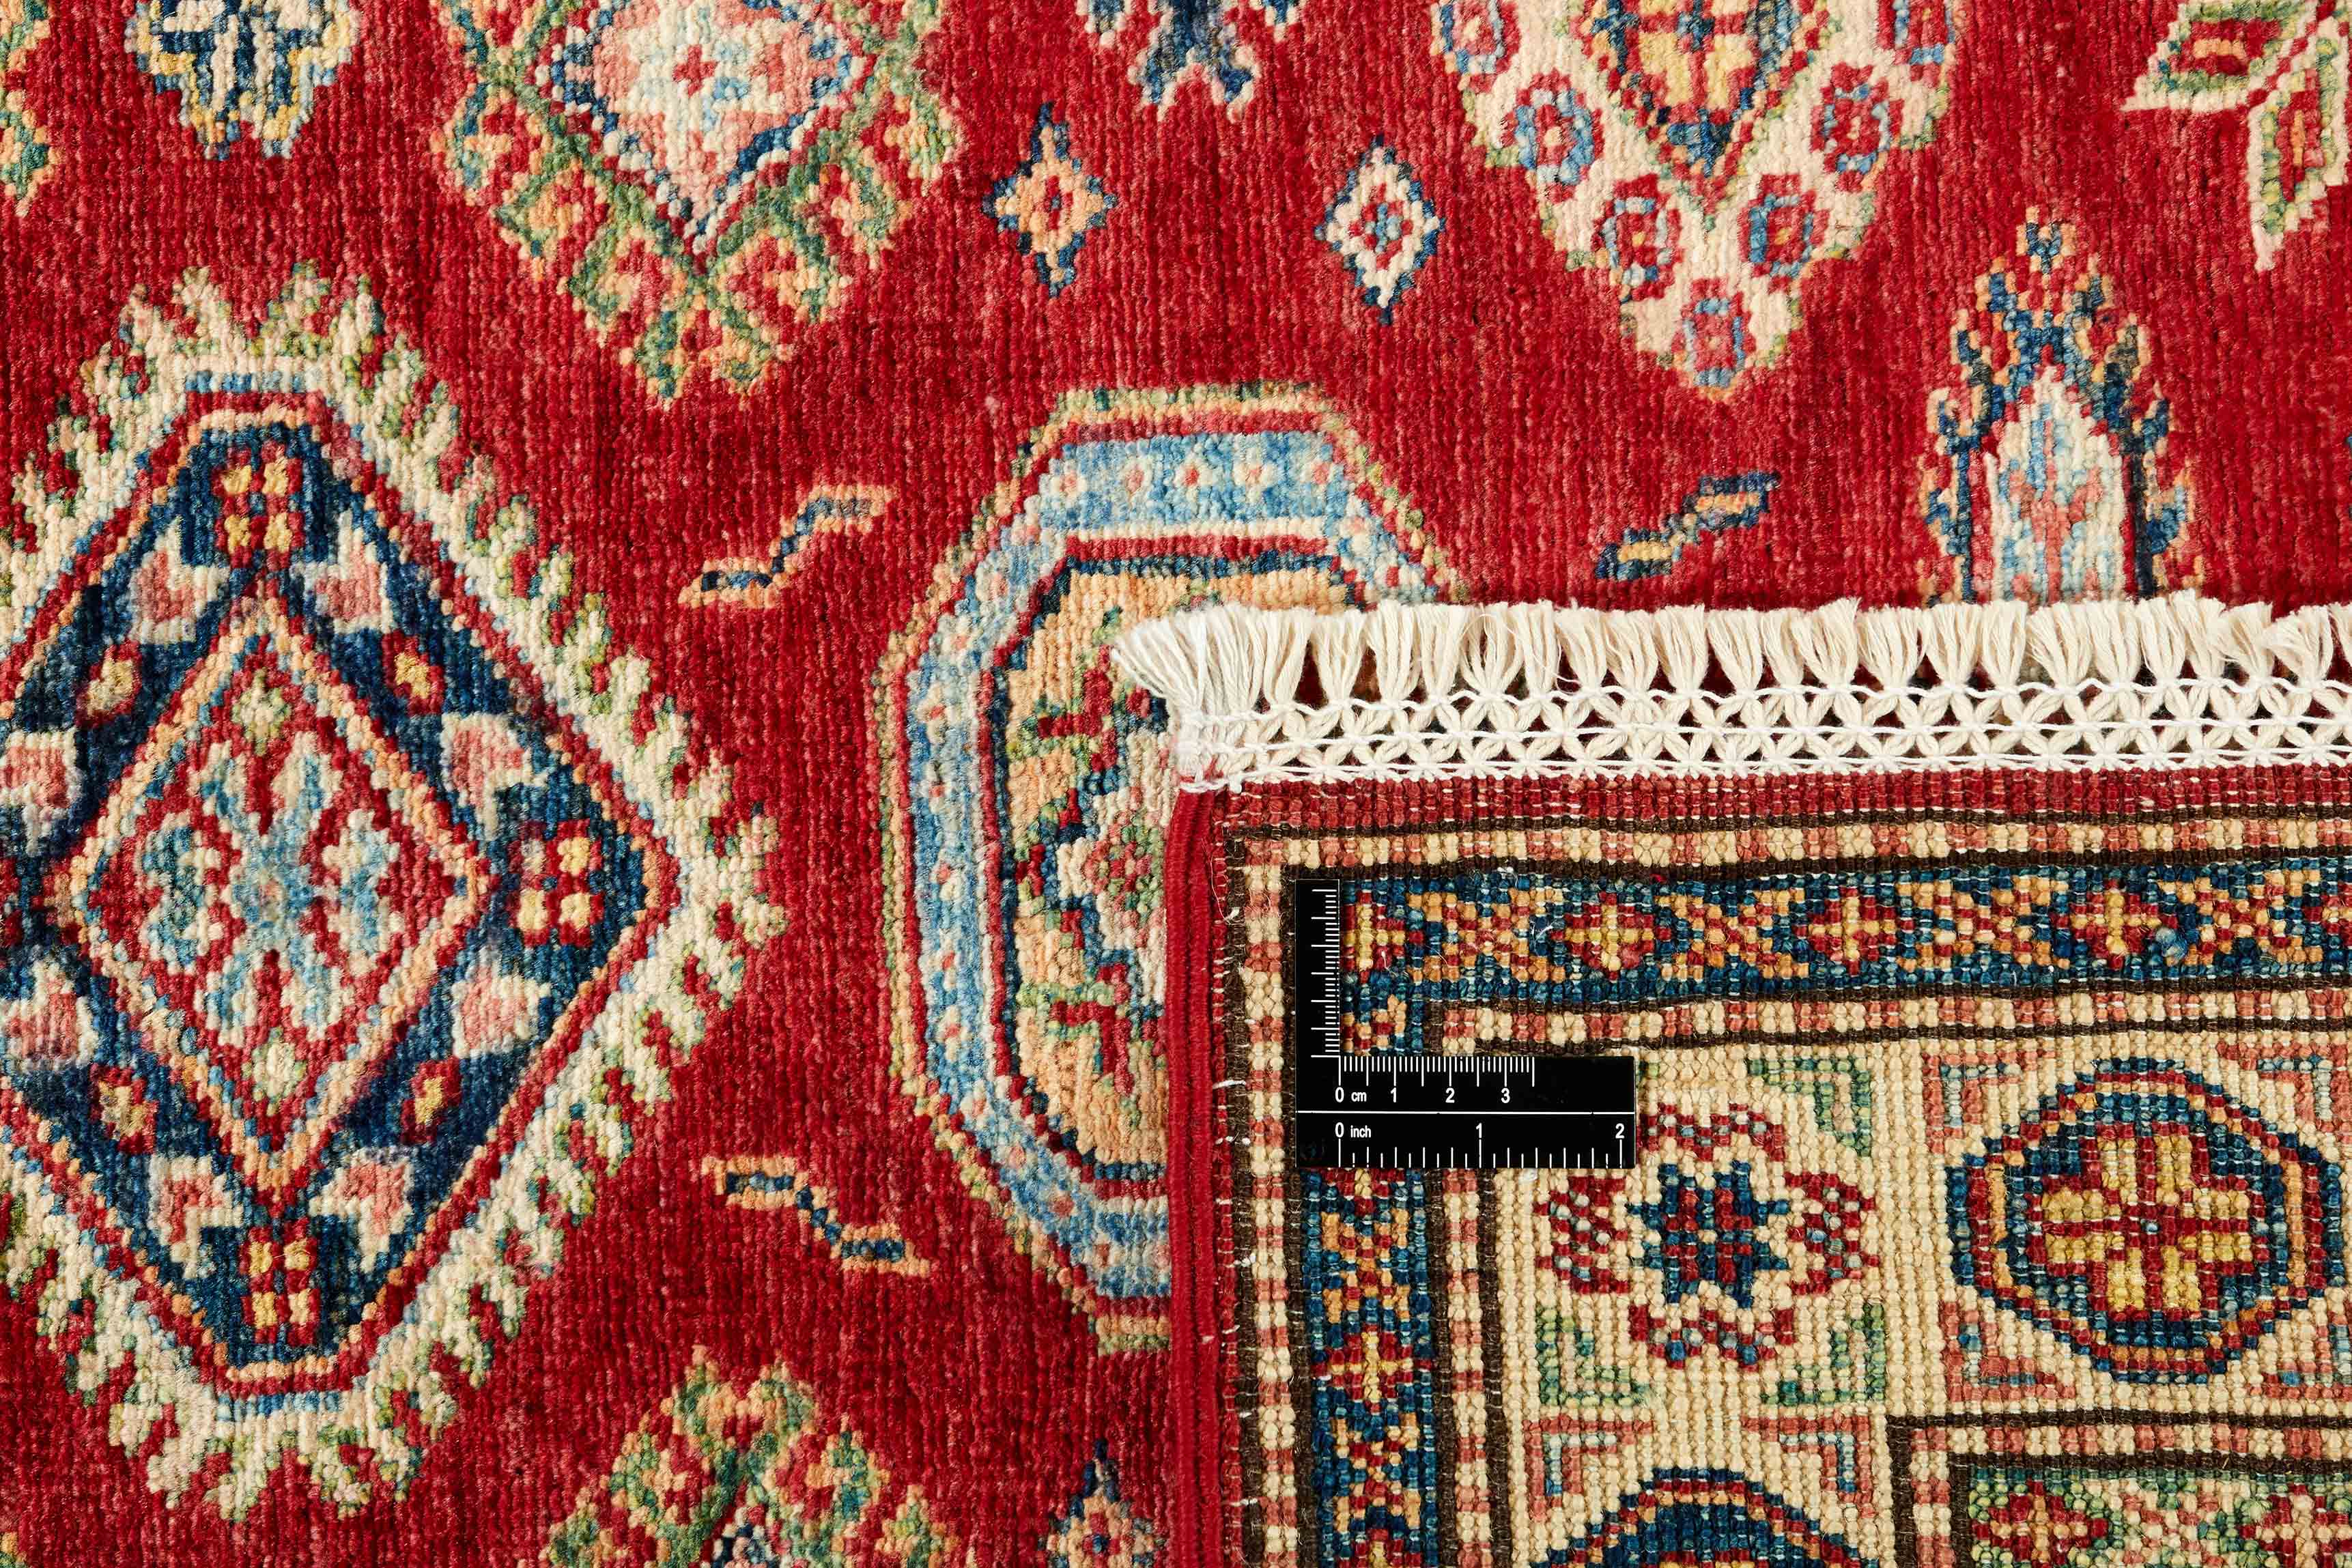 Authentic oriental rug with red and black traditional geometric design